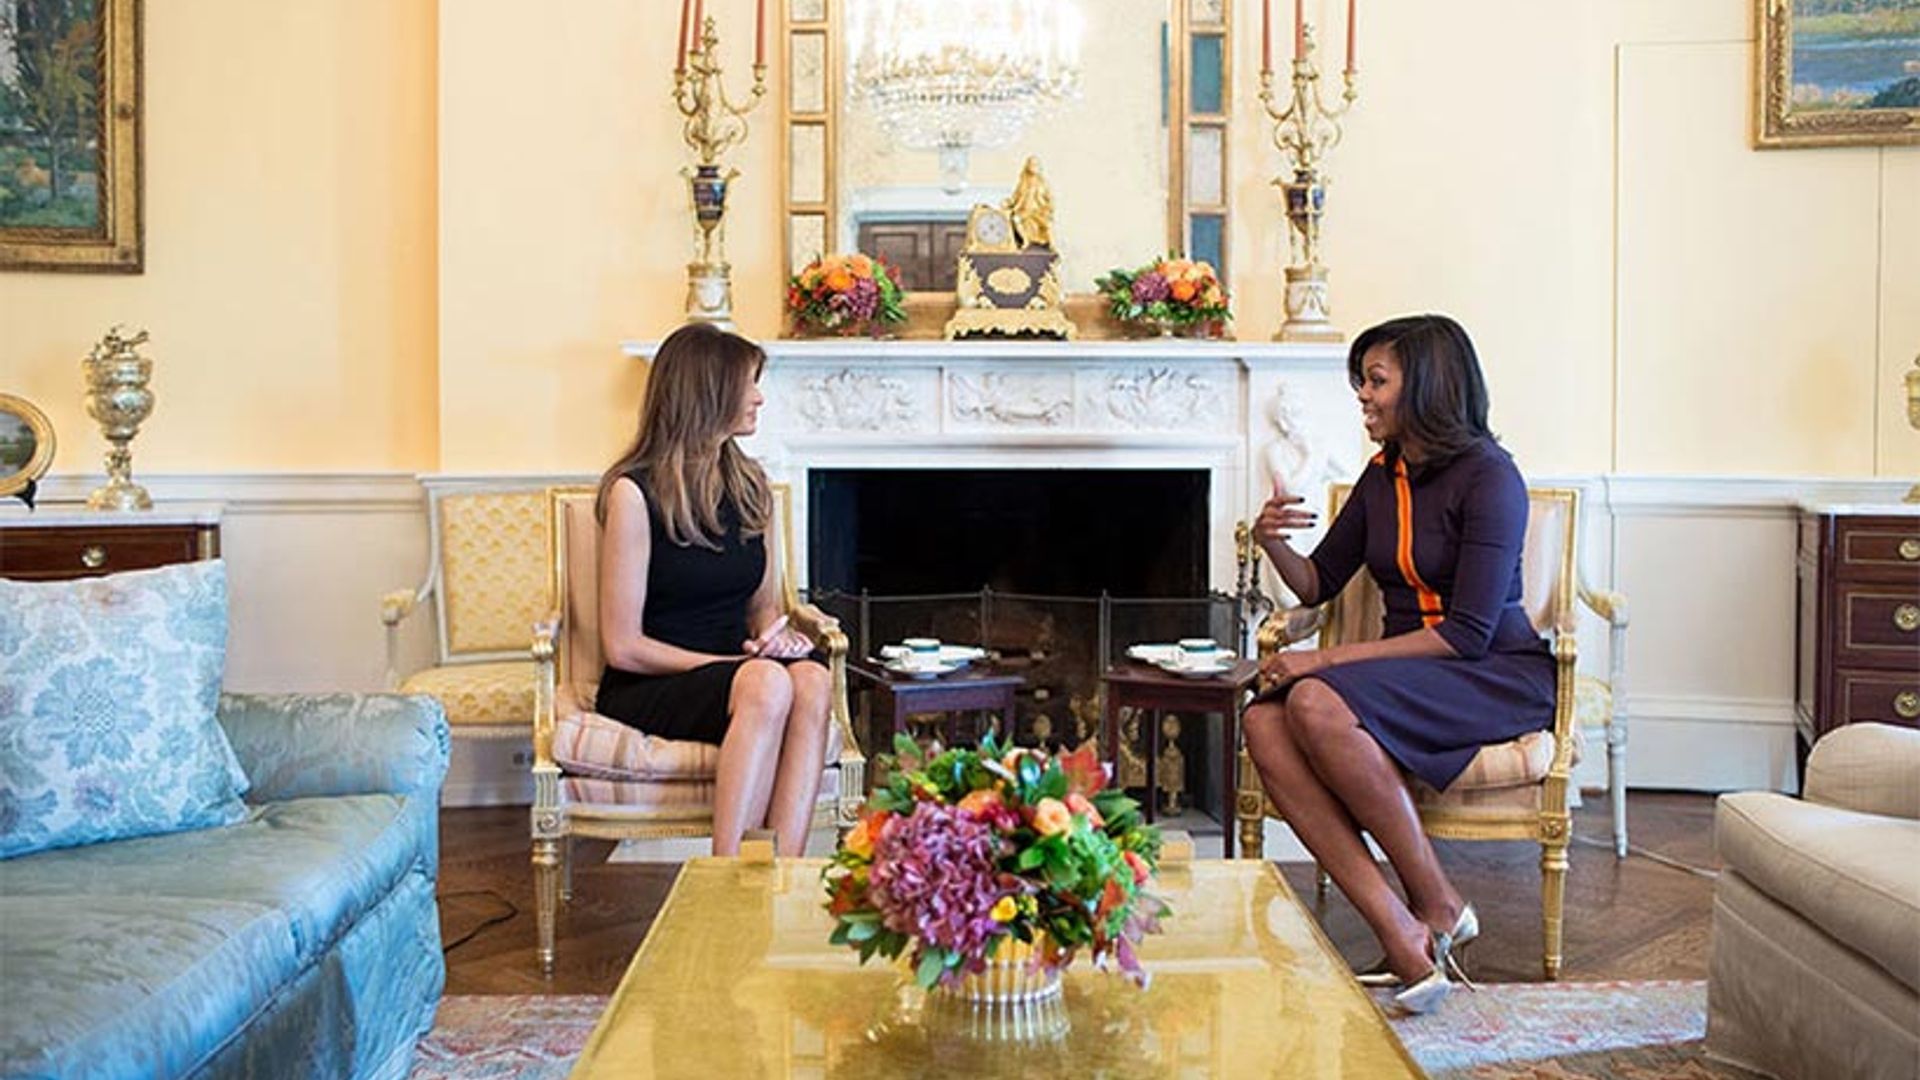 Melania Trump denies her meeting with Michelle Obama was awkward